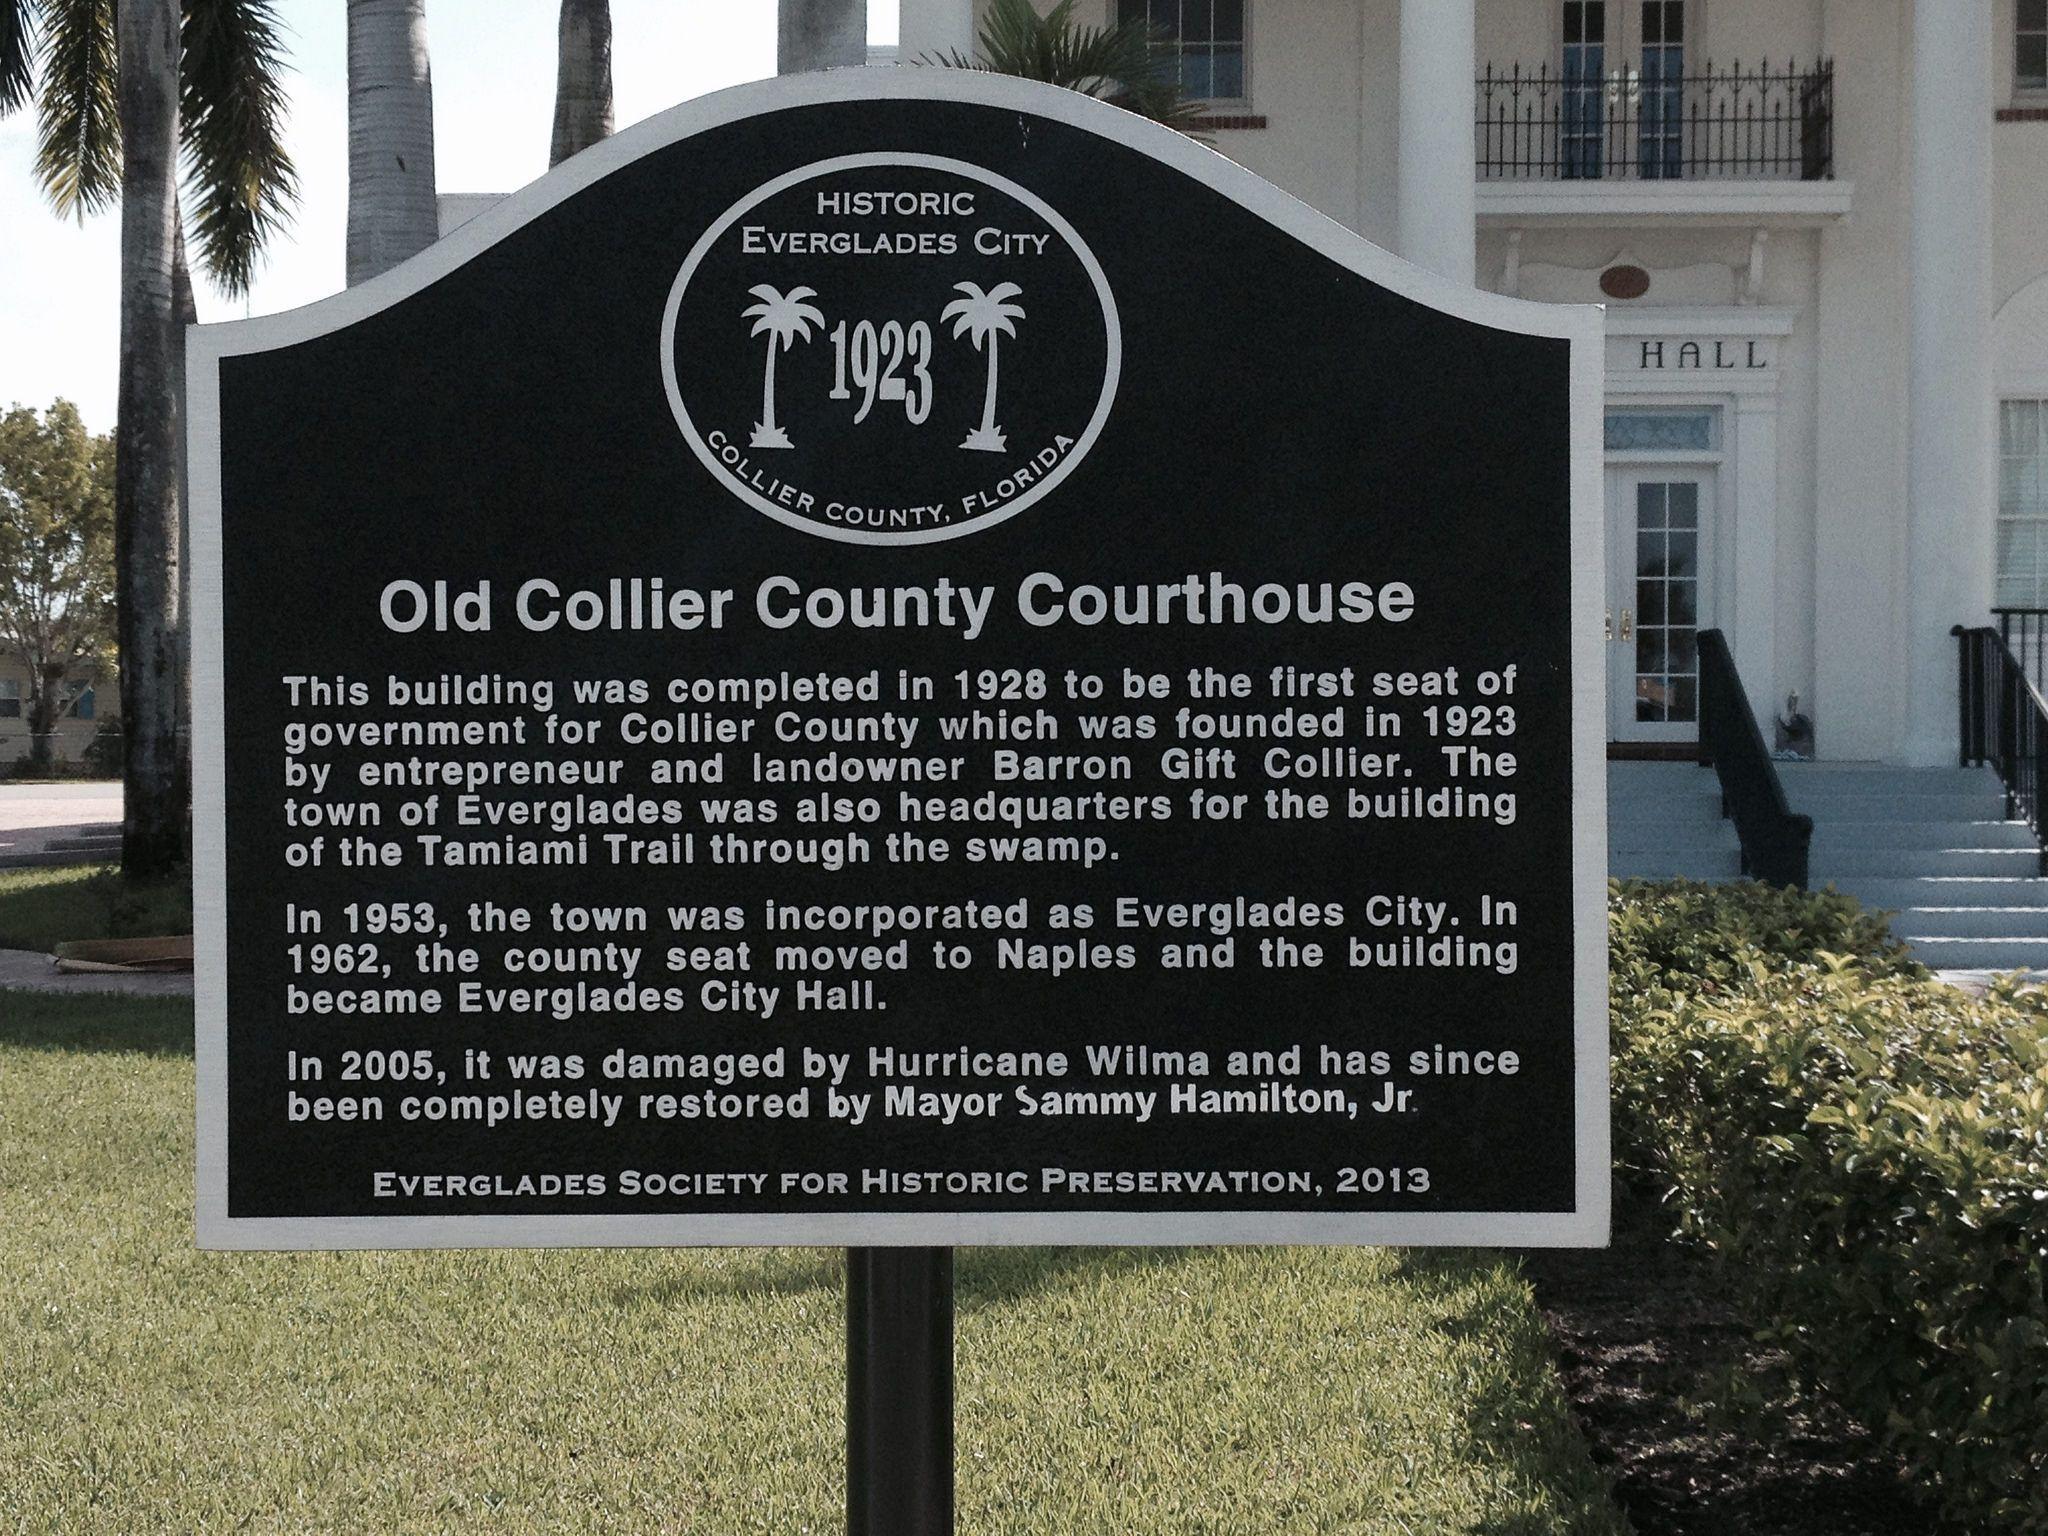 Old Collier Logo - Old Collier County Courthouse sign in Everglades City, Florida. Paul ...